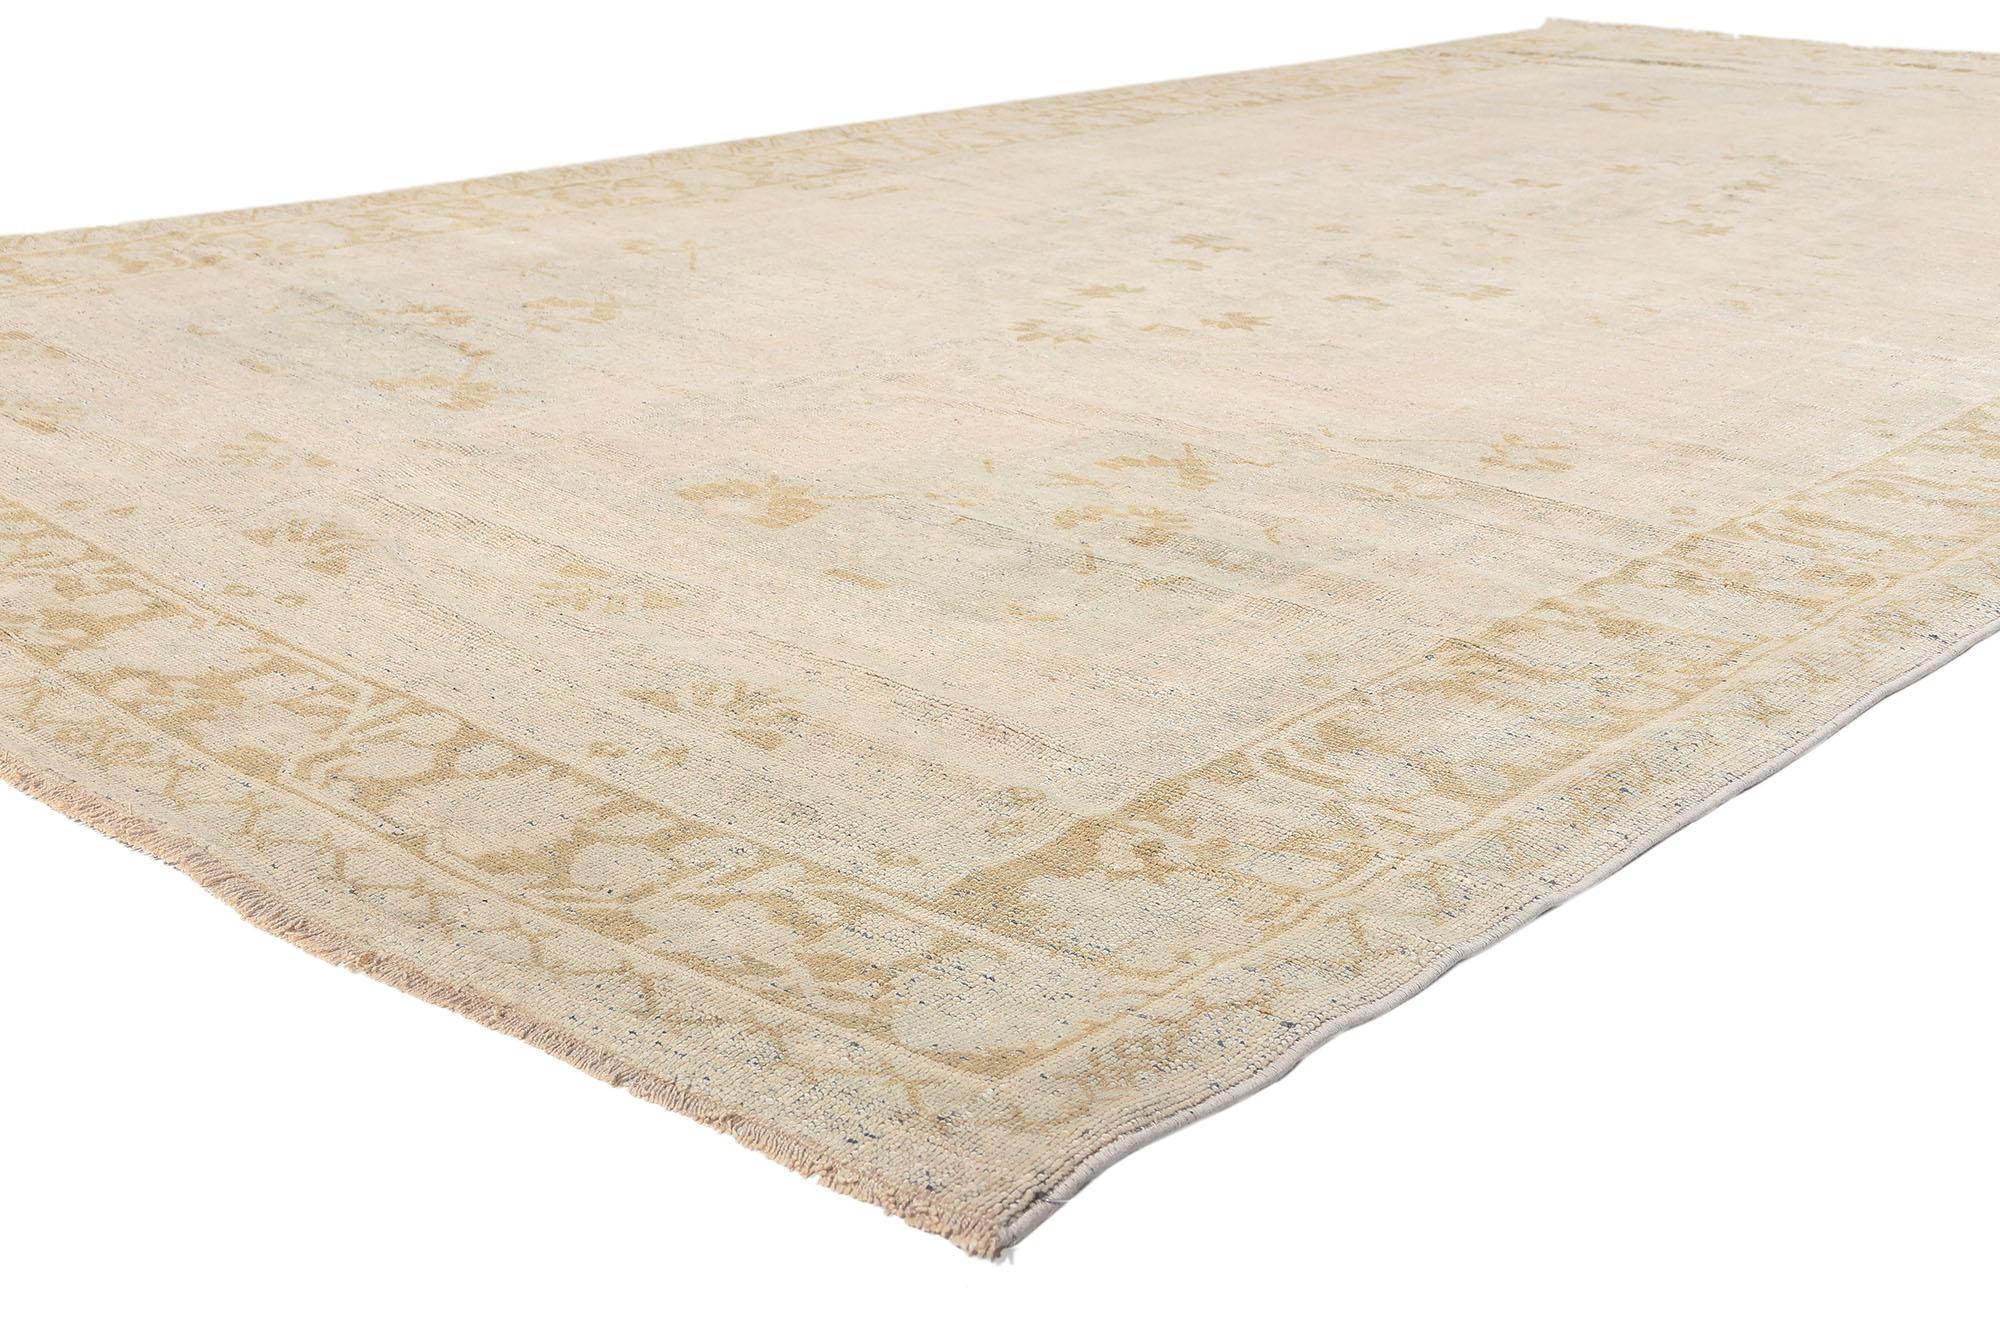 53677 Vintage Muted Oushak Turkish Rug, 07'00 x 13'02. 
​Quiet sophistication meets timeless Anatolian charm in this hand knotted wool vintage Turkish Oushak rug. The faded botanical silhouette and muted neutral colors woven into this piece work